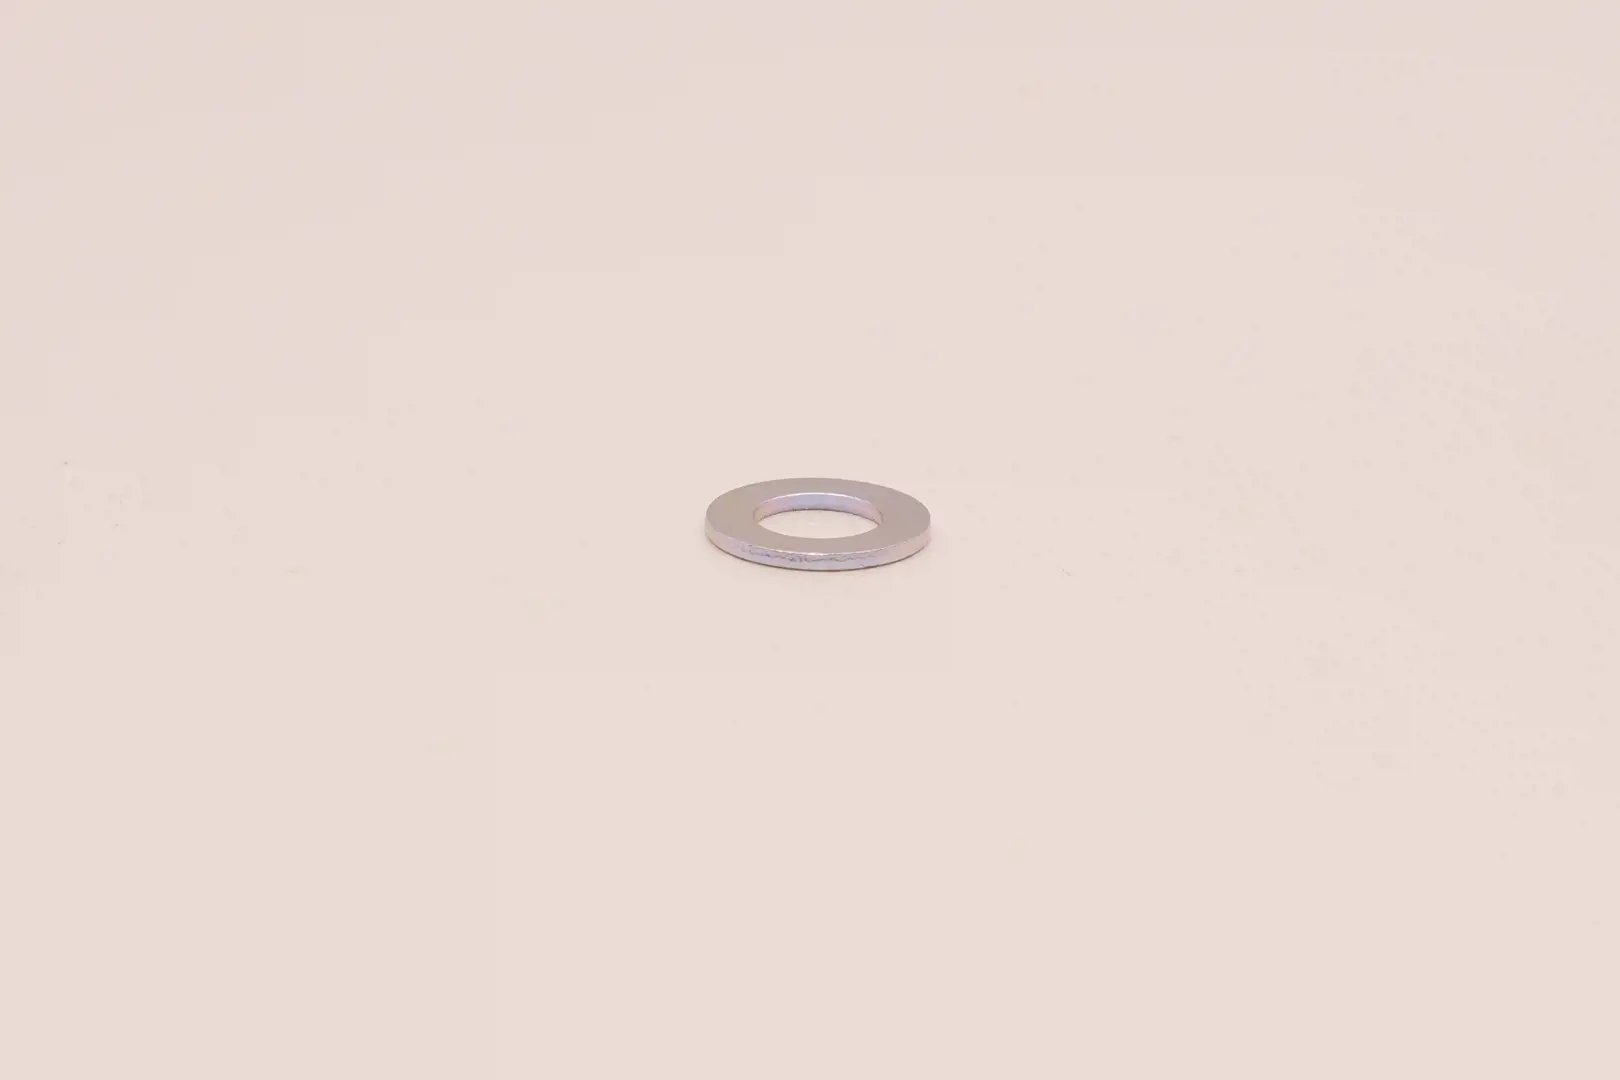 Image 1 for #04012-50050 WASHER, PLAIN